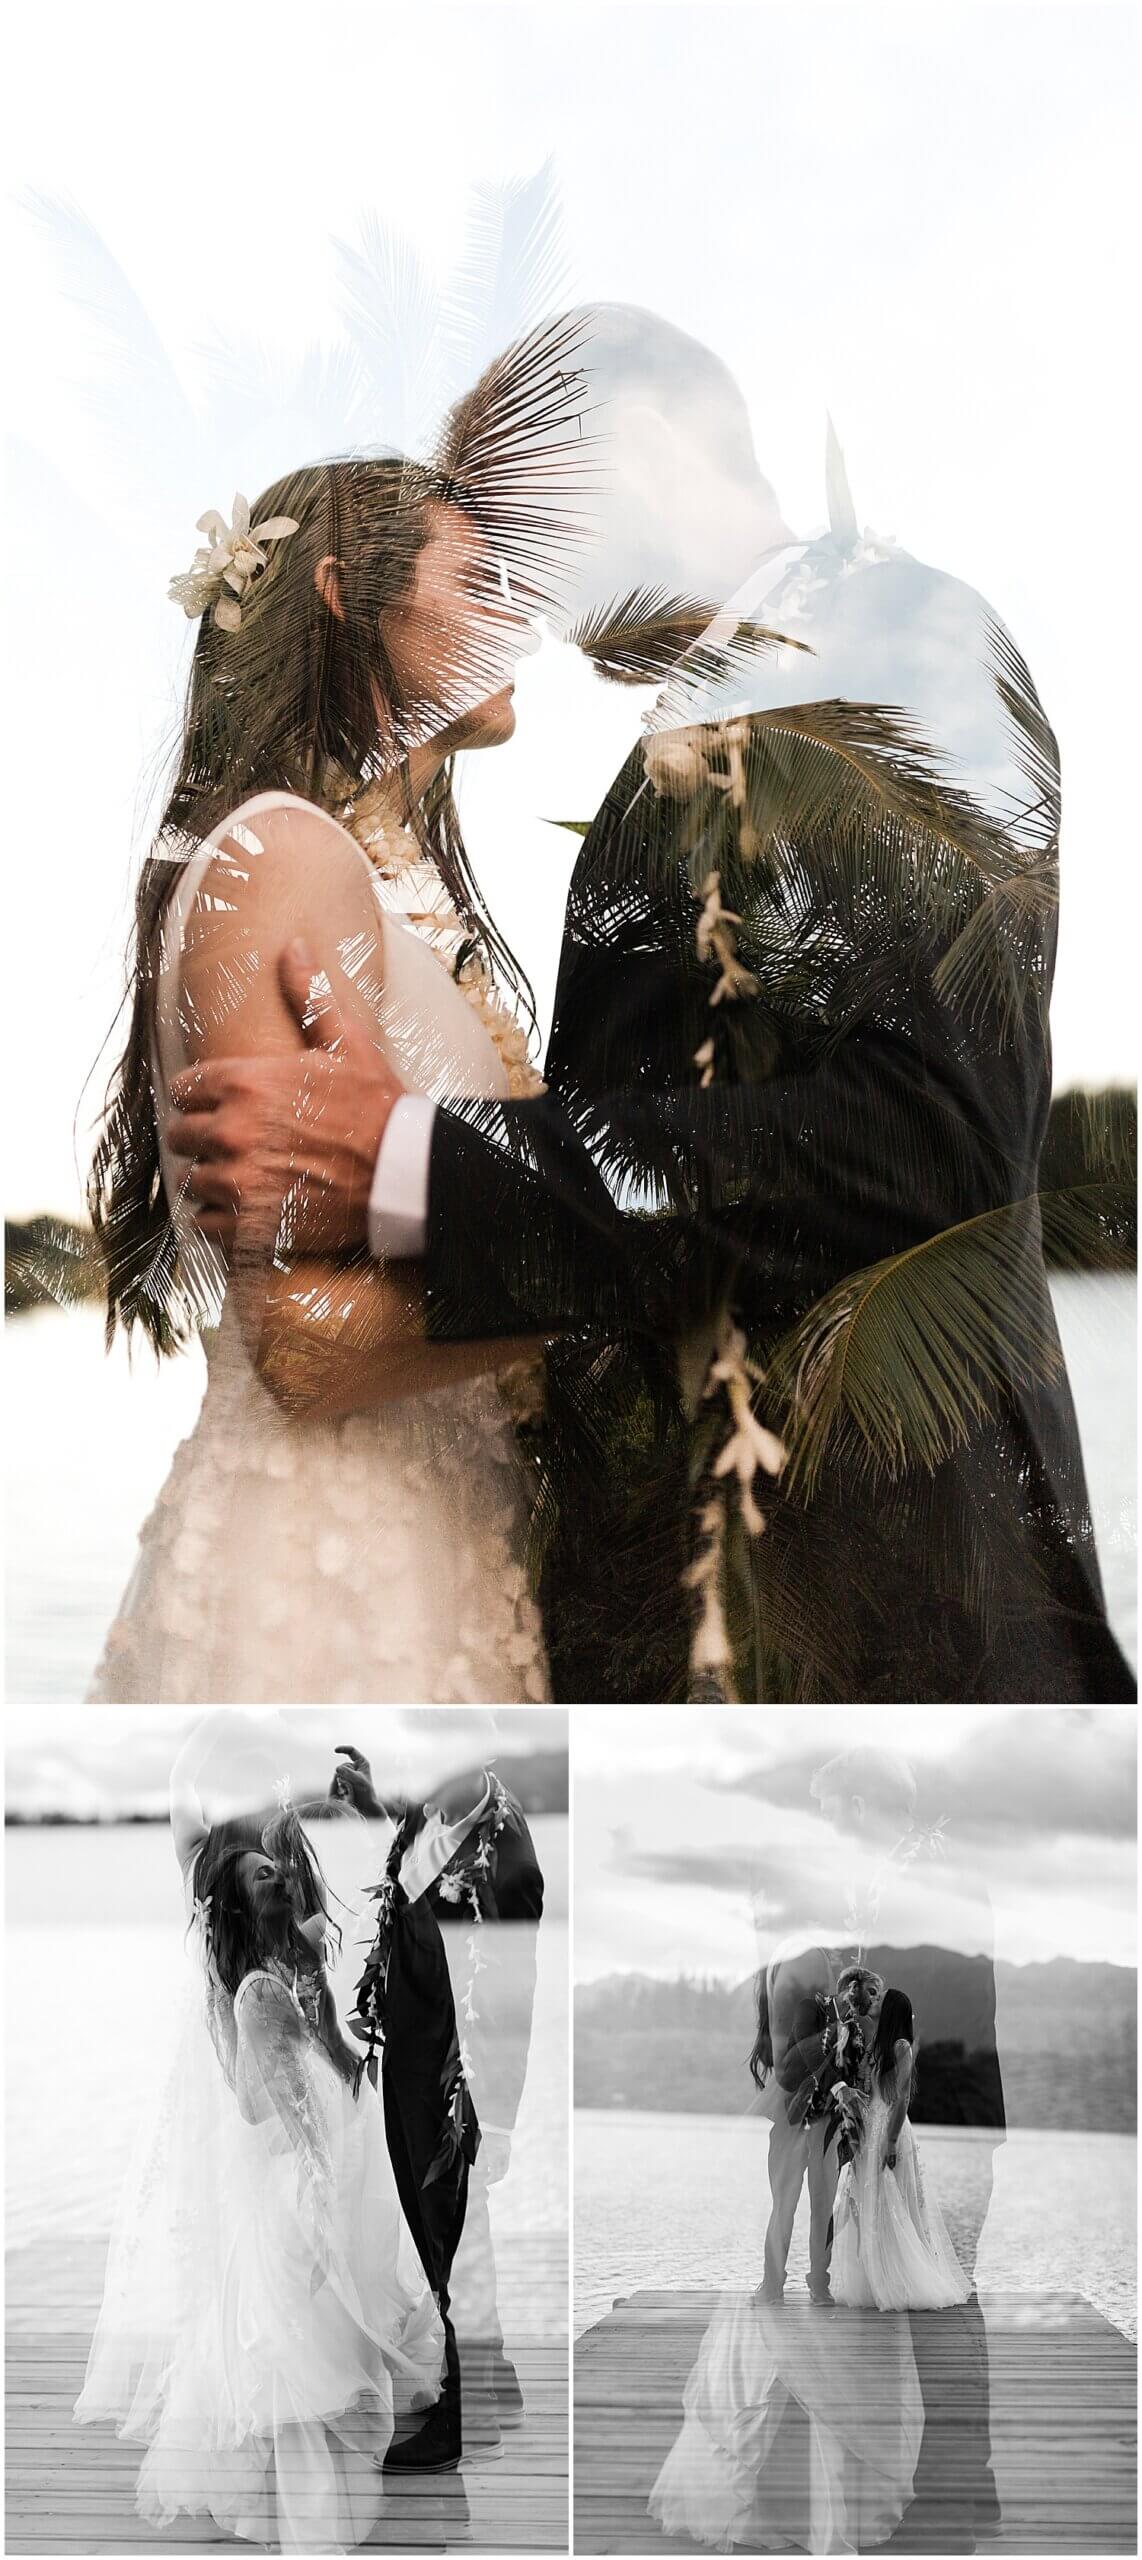 creative double exposure wedding photography of bride and groom by Elle rose photo